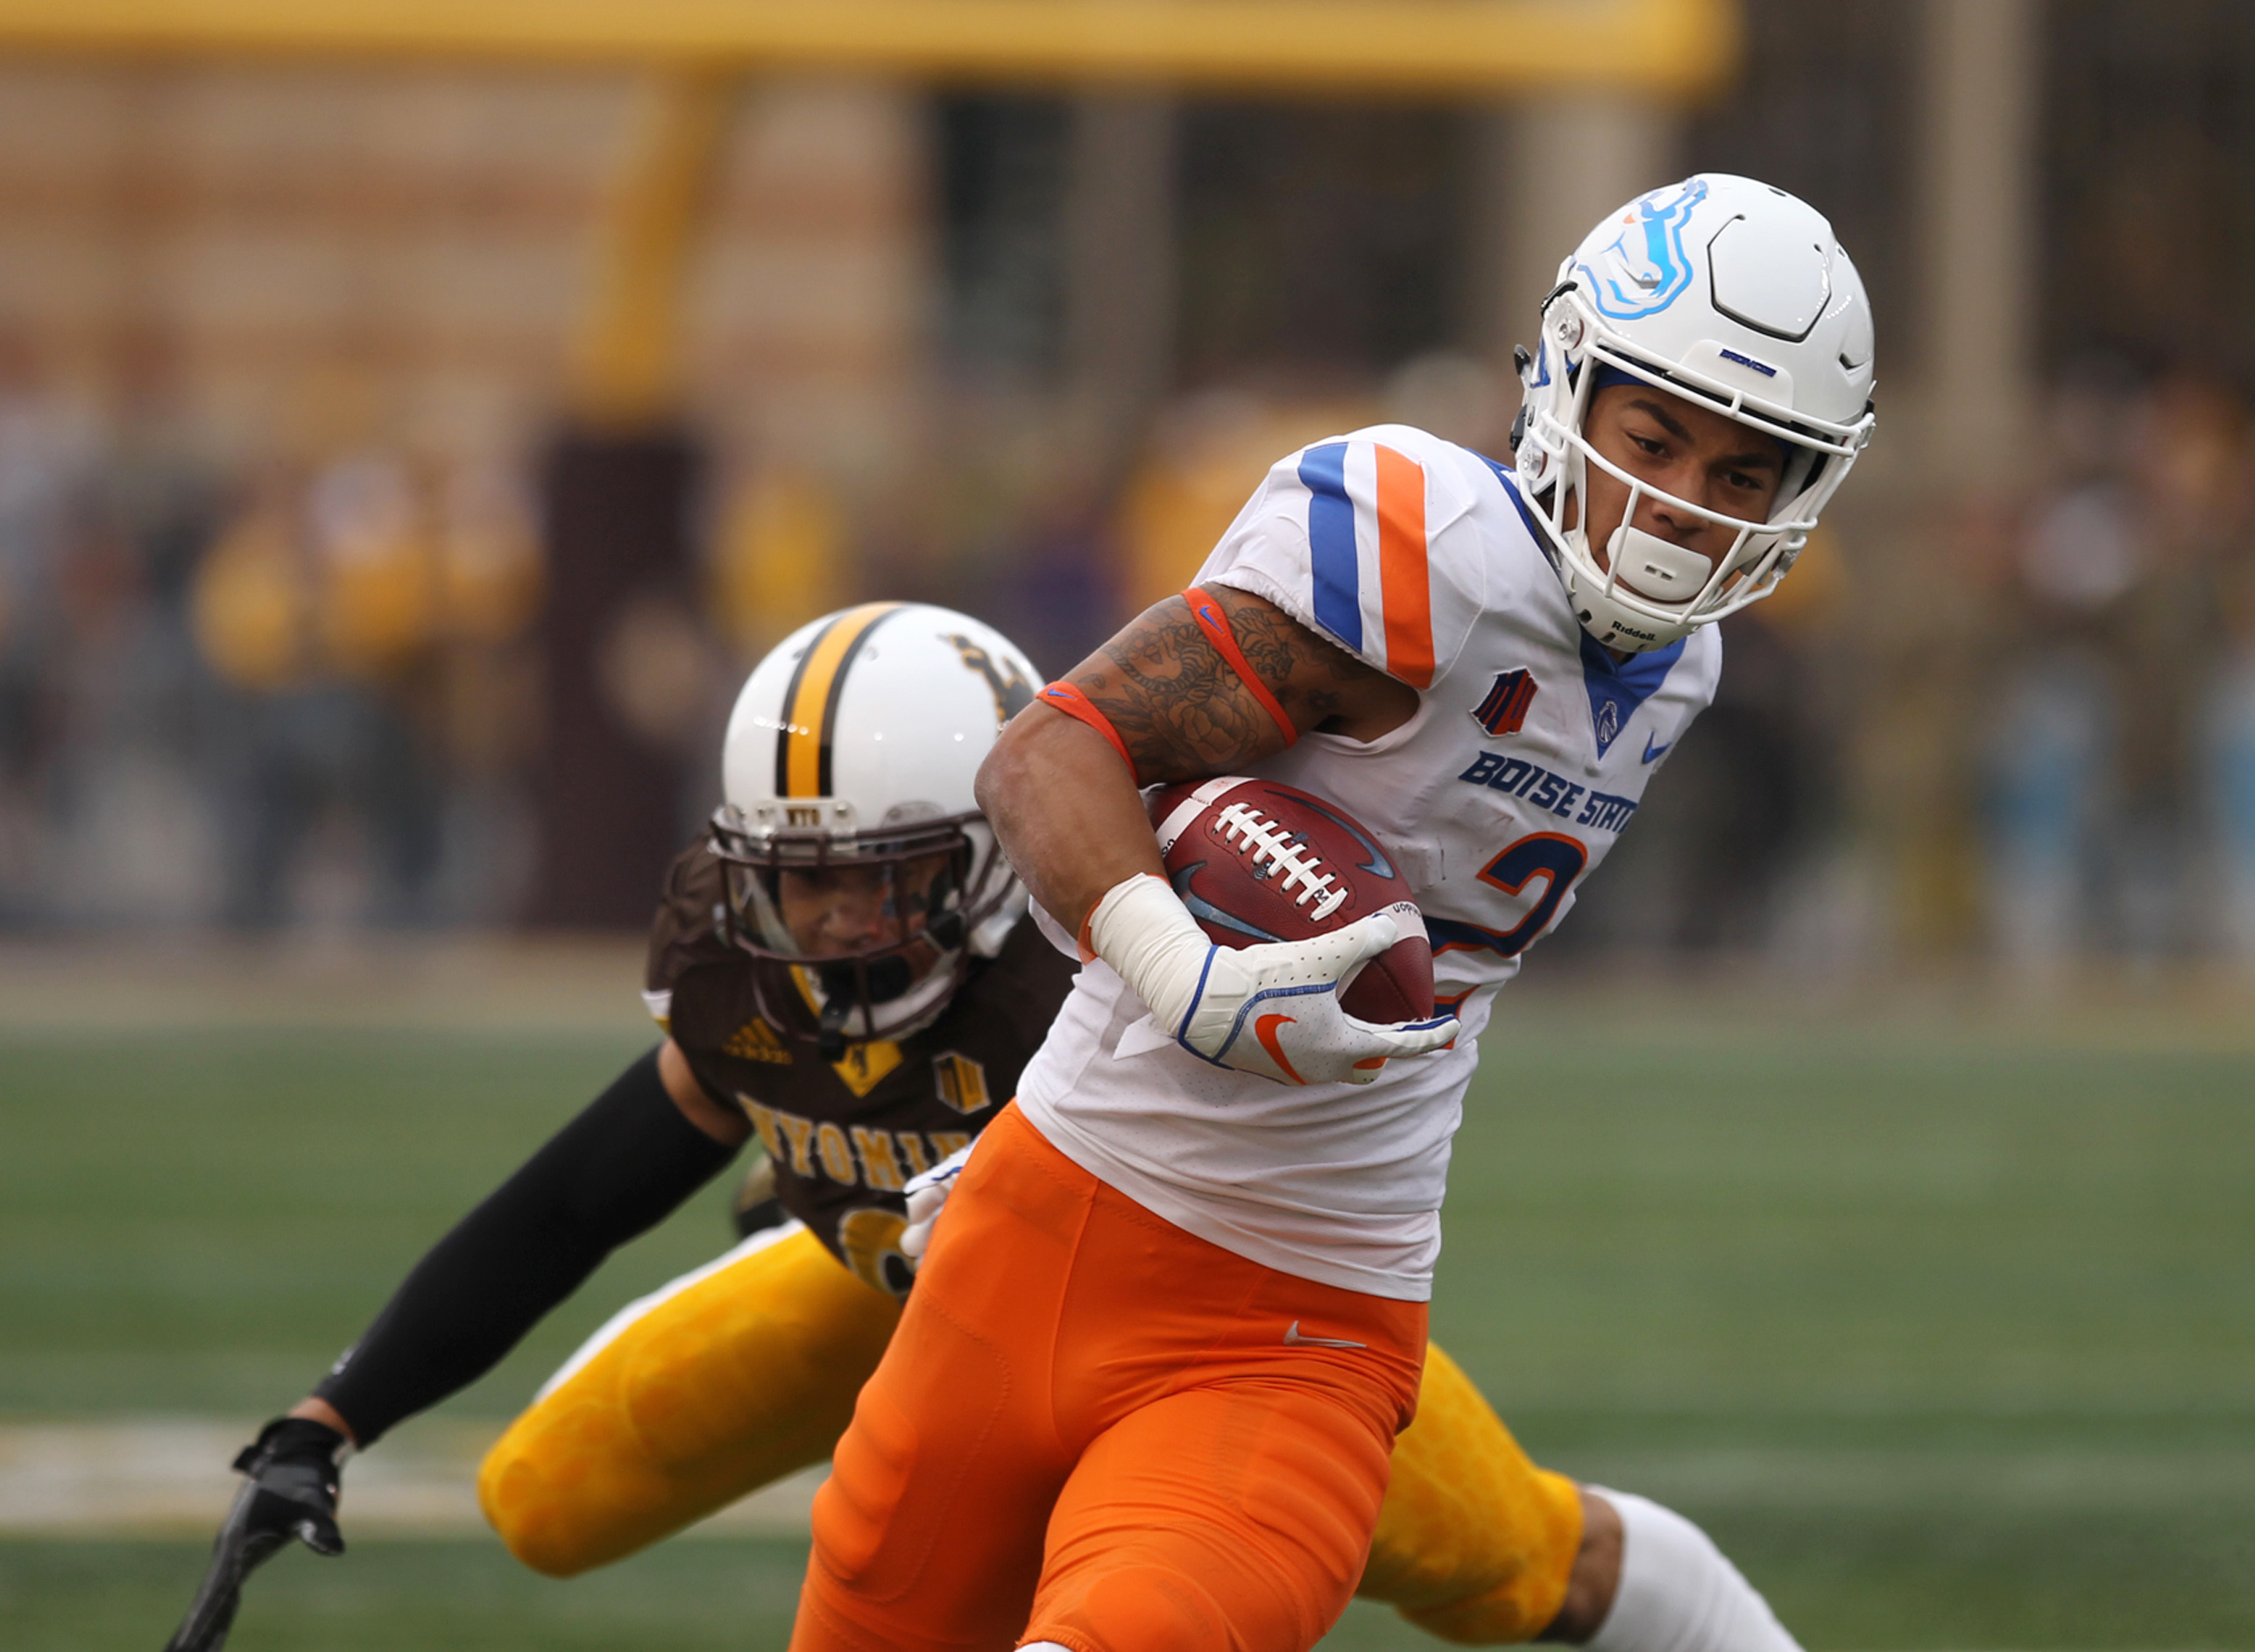 Rypien leads Boise State to 34-14 win at Wyoming